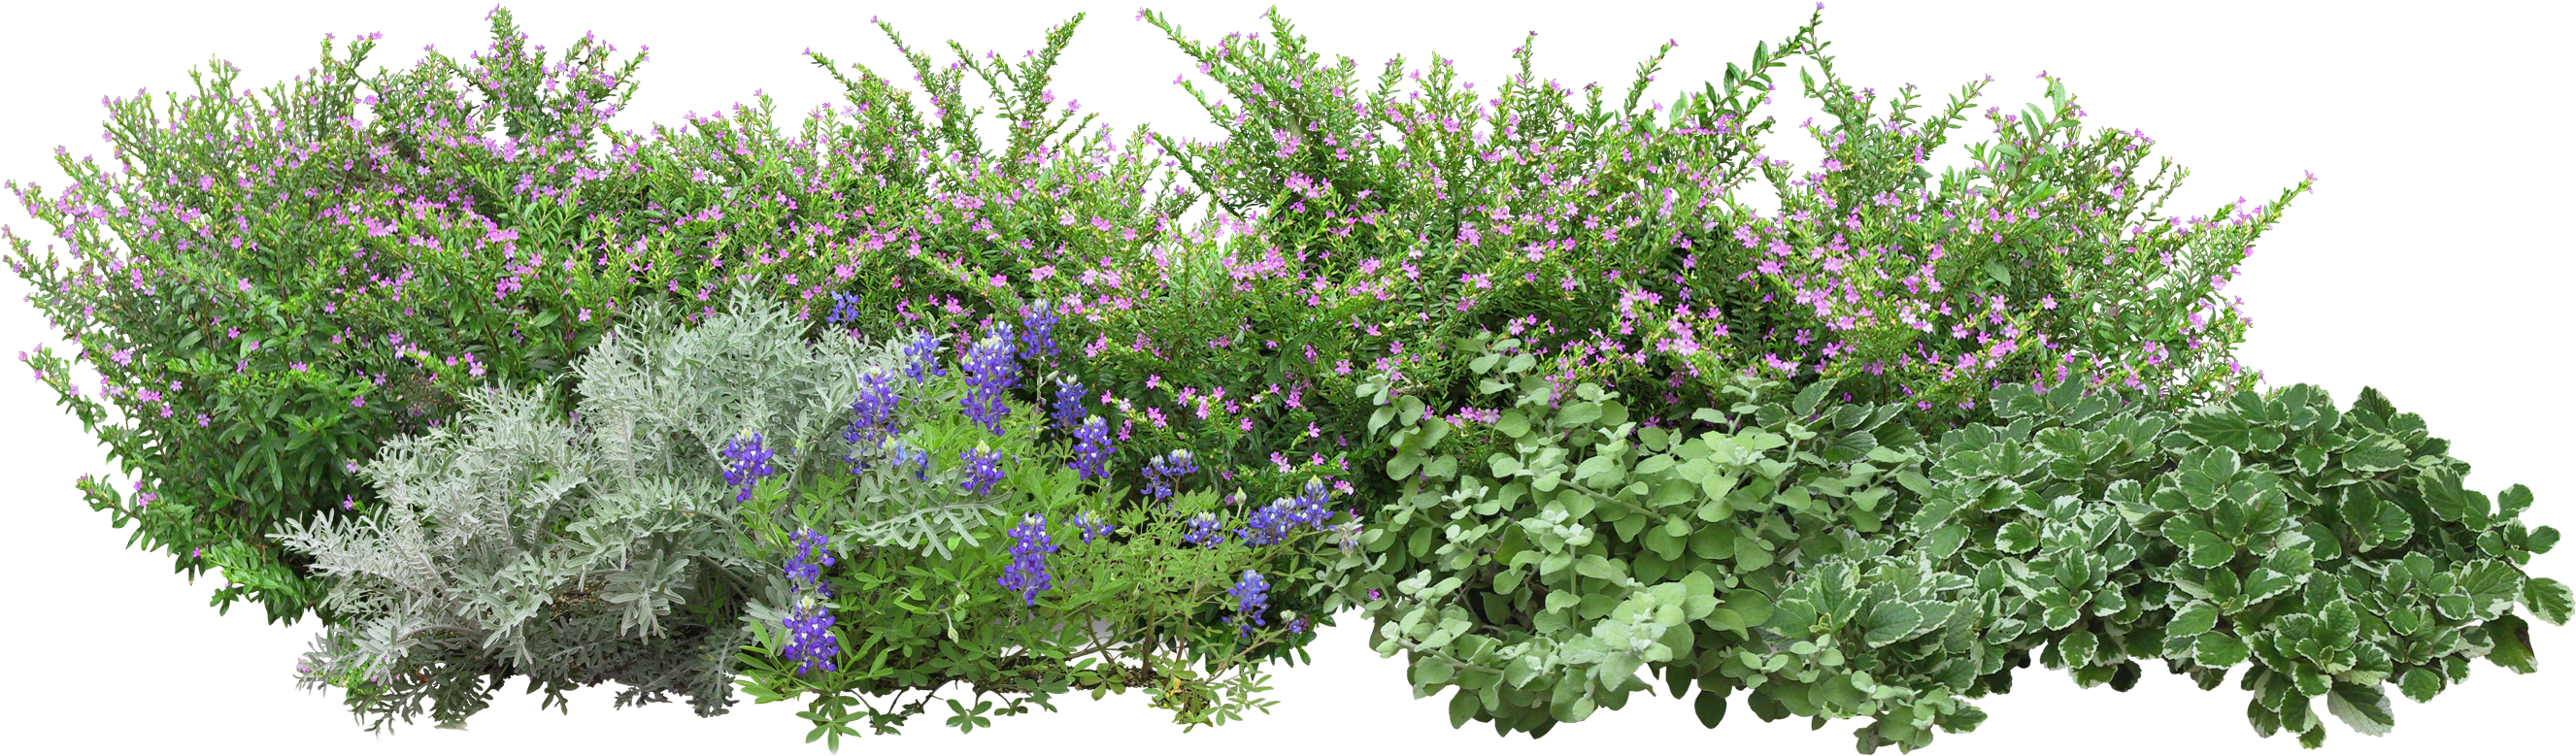 Garden Png Images Png All